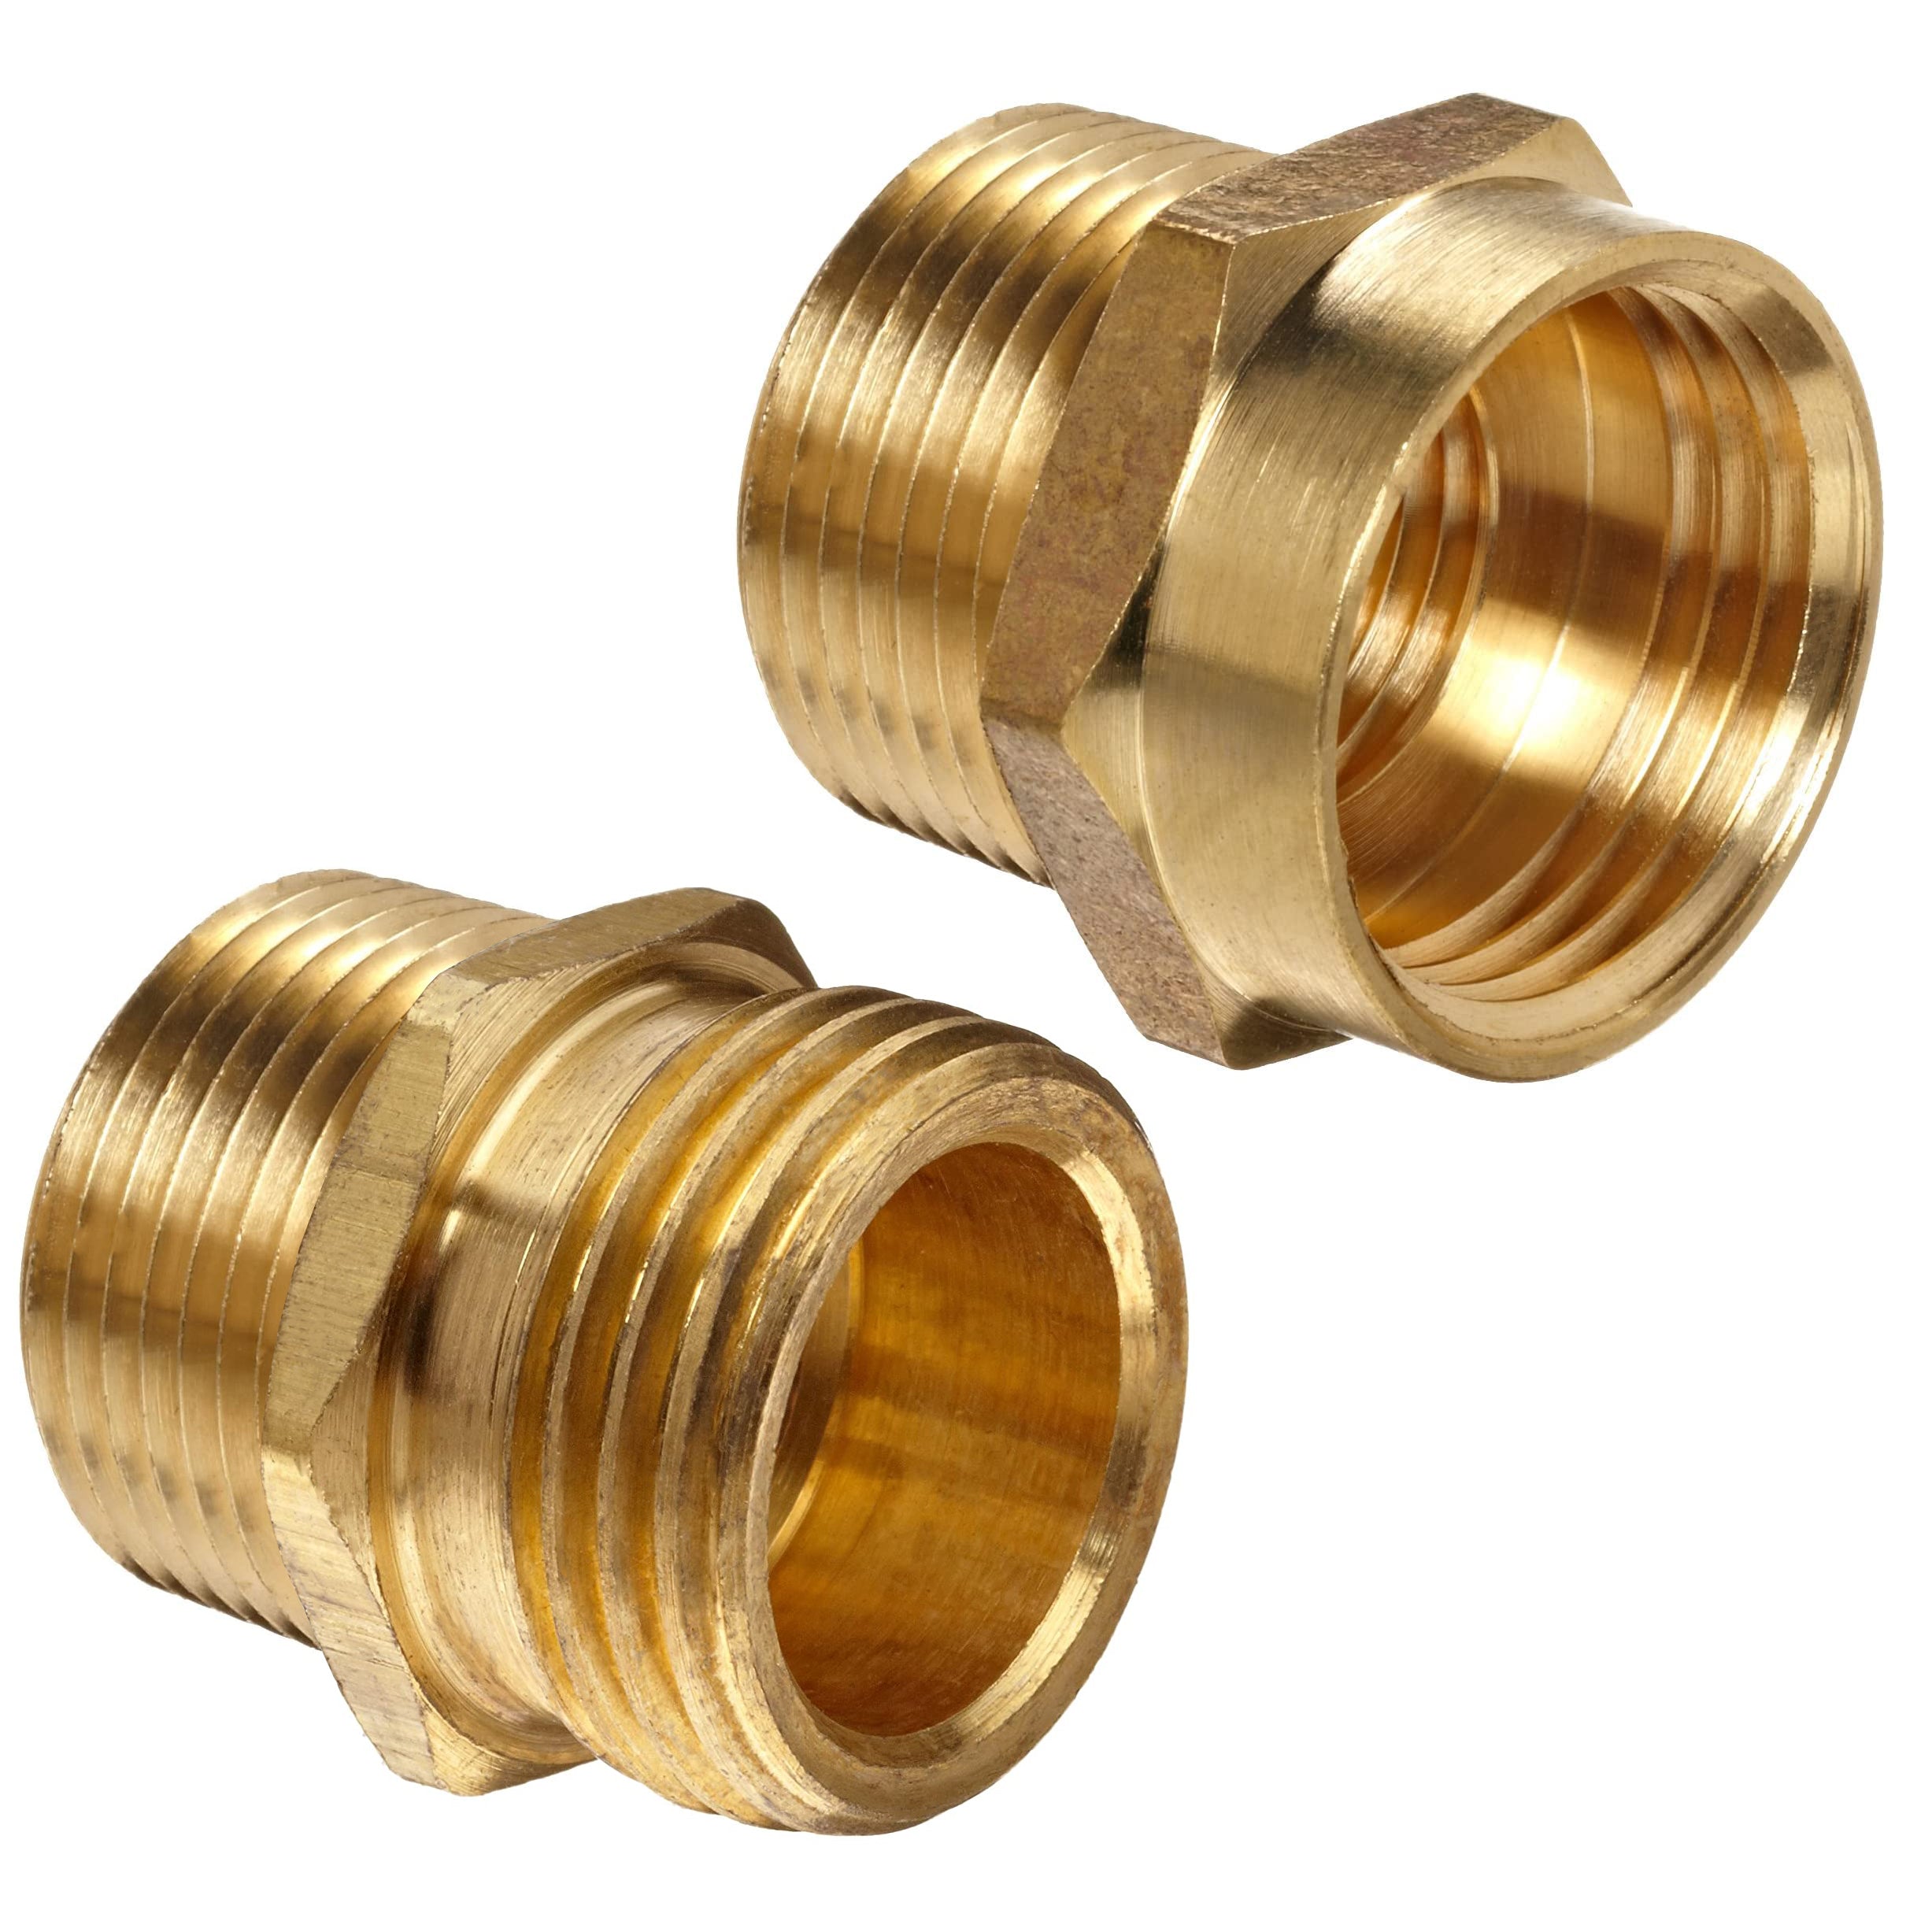 Brass Garden Hose Fitting Adapters 3/4 Male NPT to 3/4 GHT Set